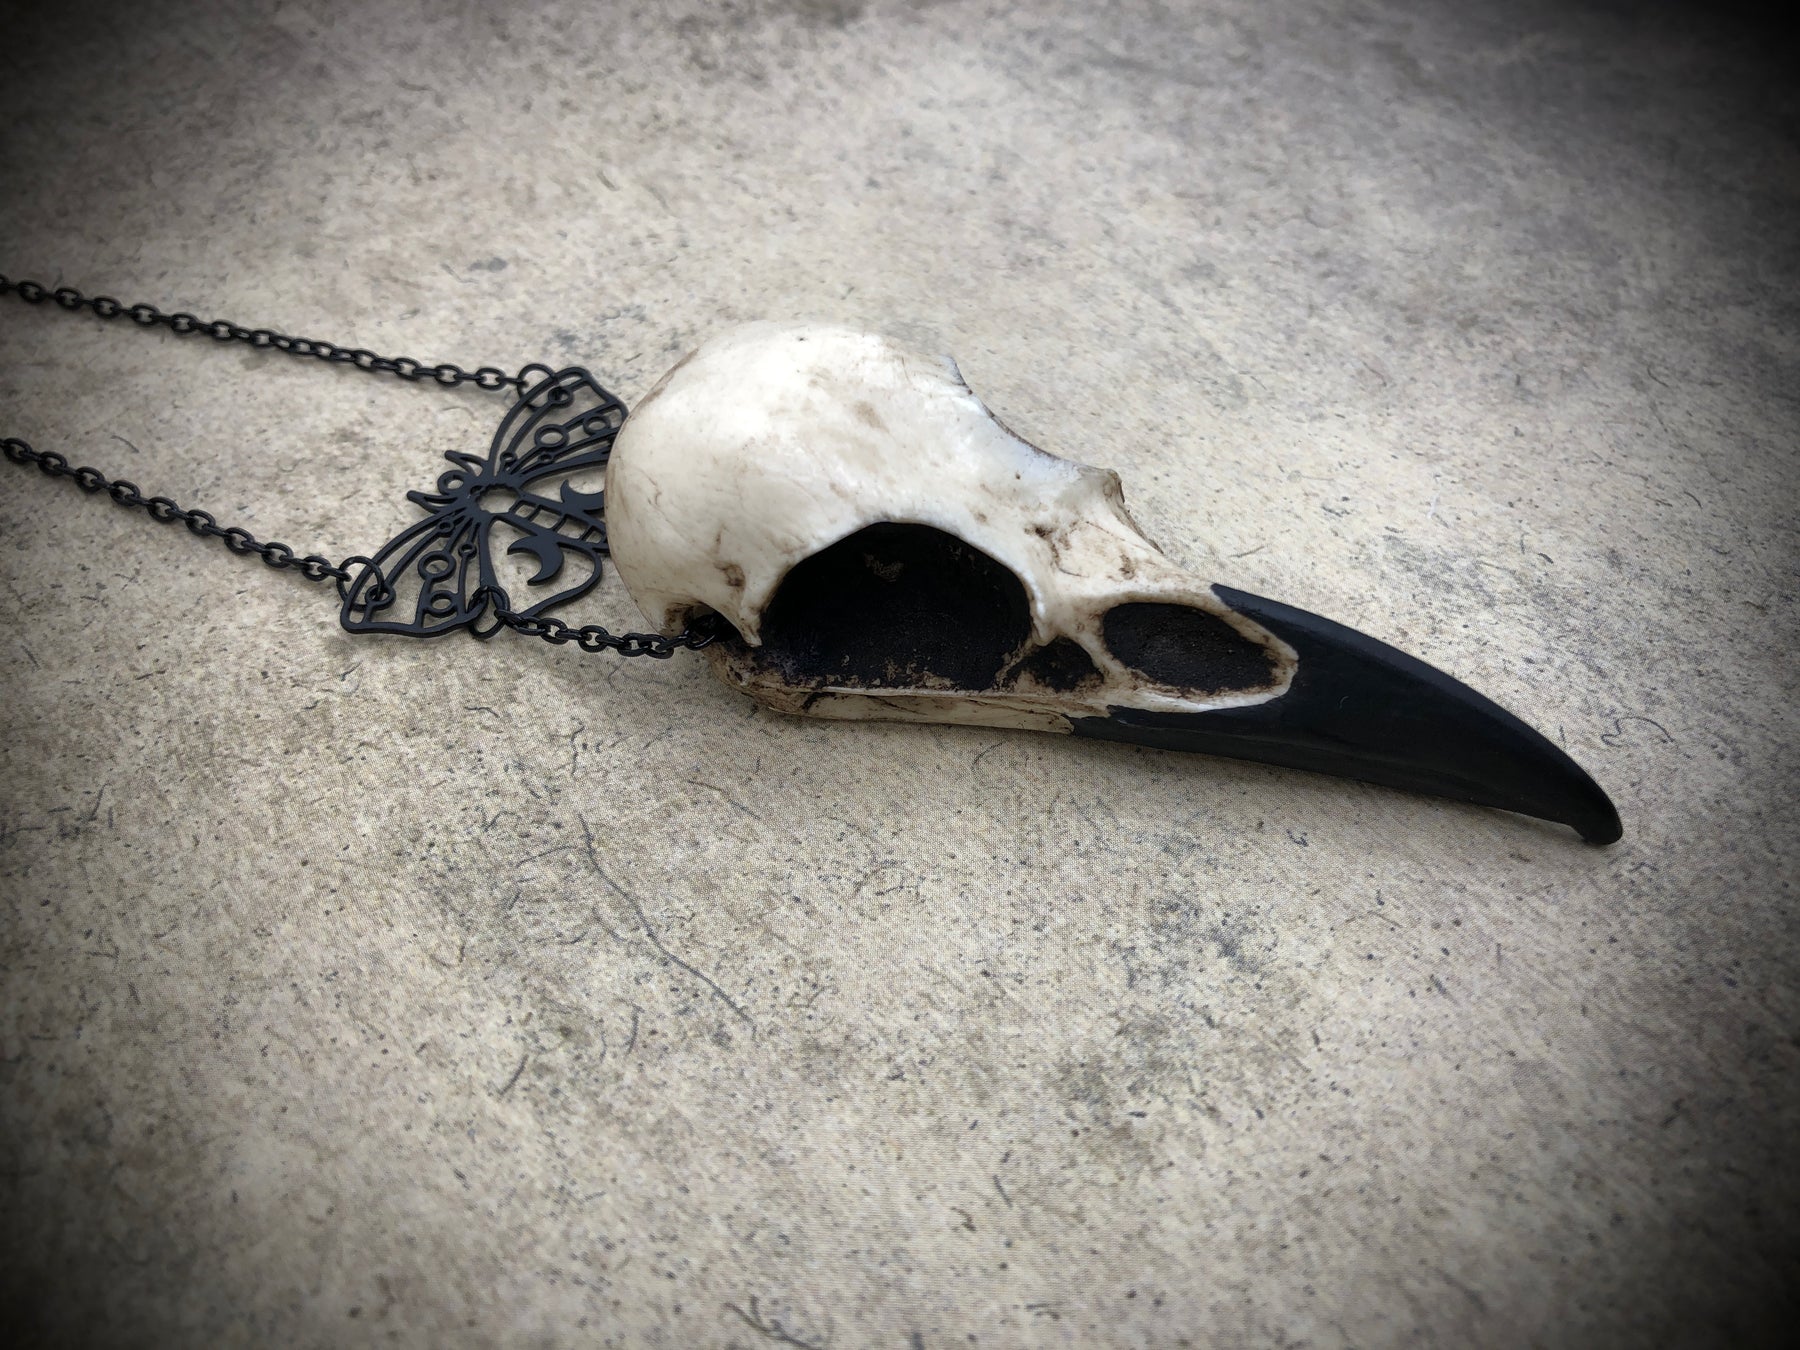 Side view of Gothic black death moth luna butterfly charm pendant and bone jewelry mini raven skull dangle pendant.